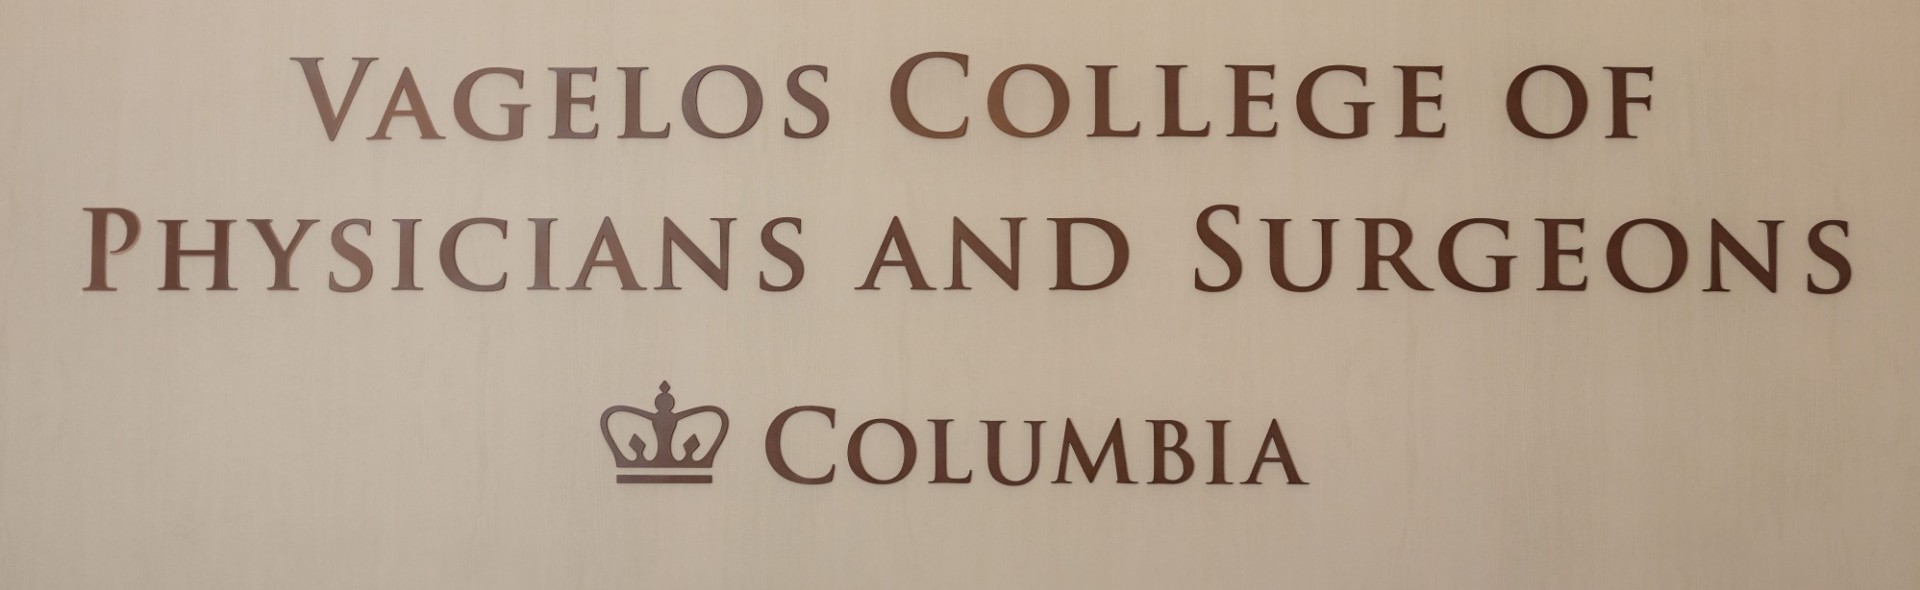 "Columbia Vagelos College of Physicians and Surgeons" sign on display in the P&S Building.